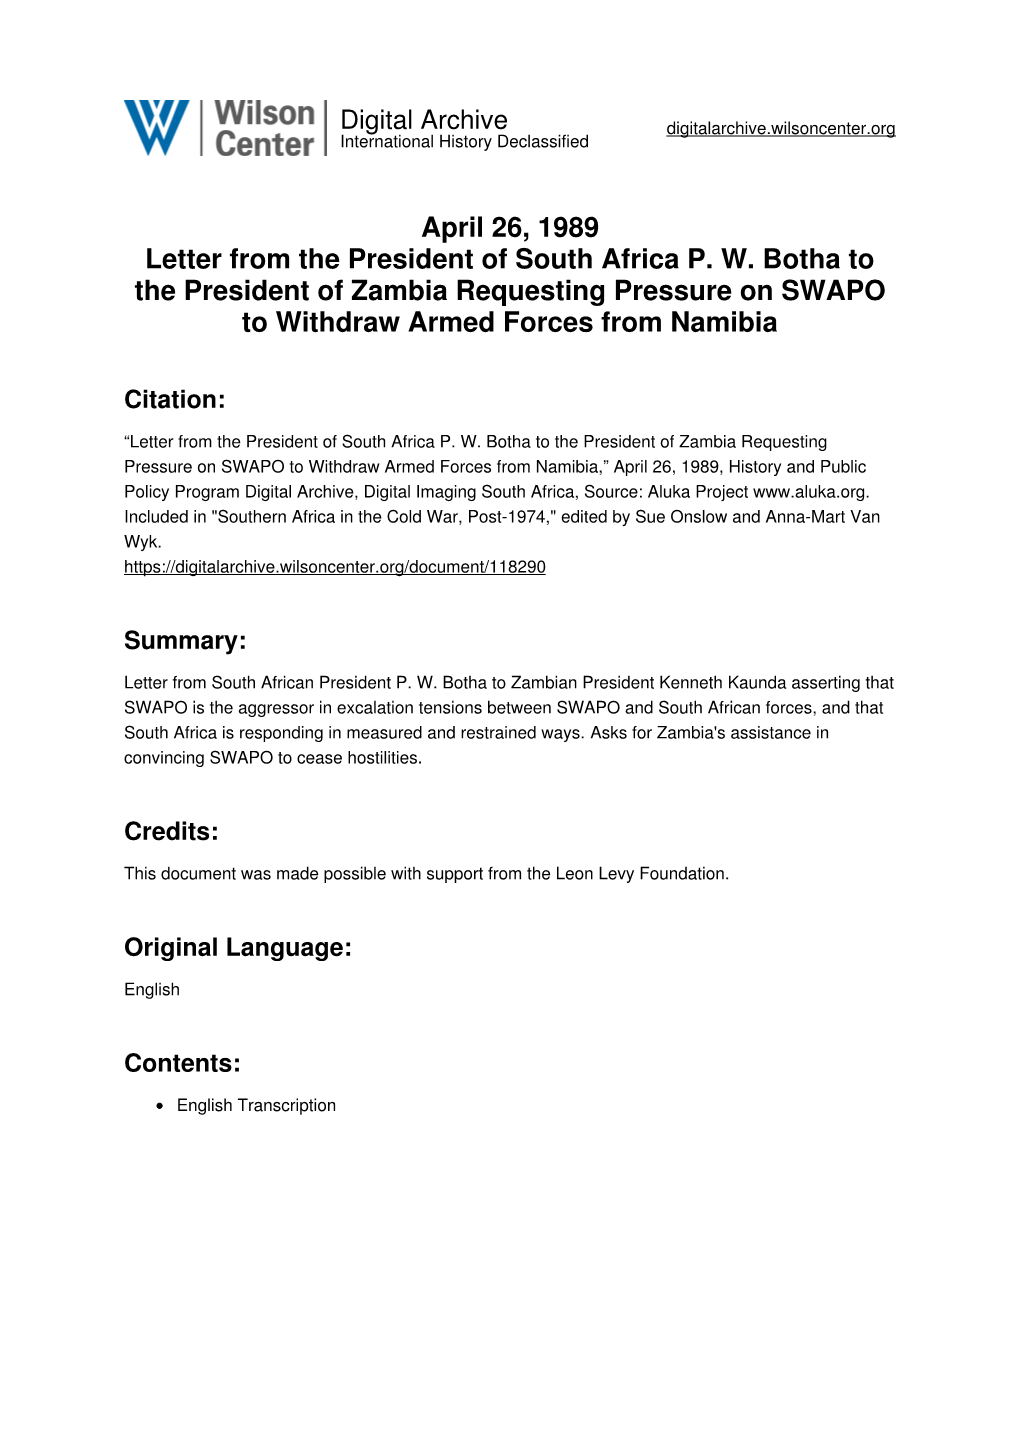 April 26, 1989 Letter from the President of South Africa P. W. Botha to the President of Zambia Requesting Pressure on SWAPO to Withdraw Armed Forces from Namibia